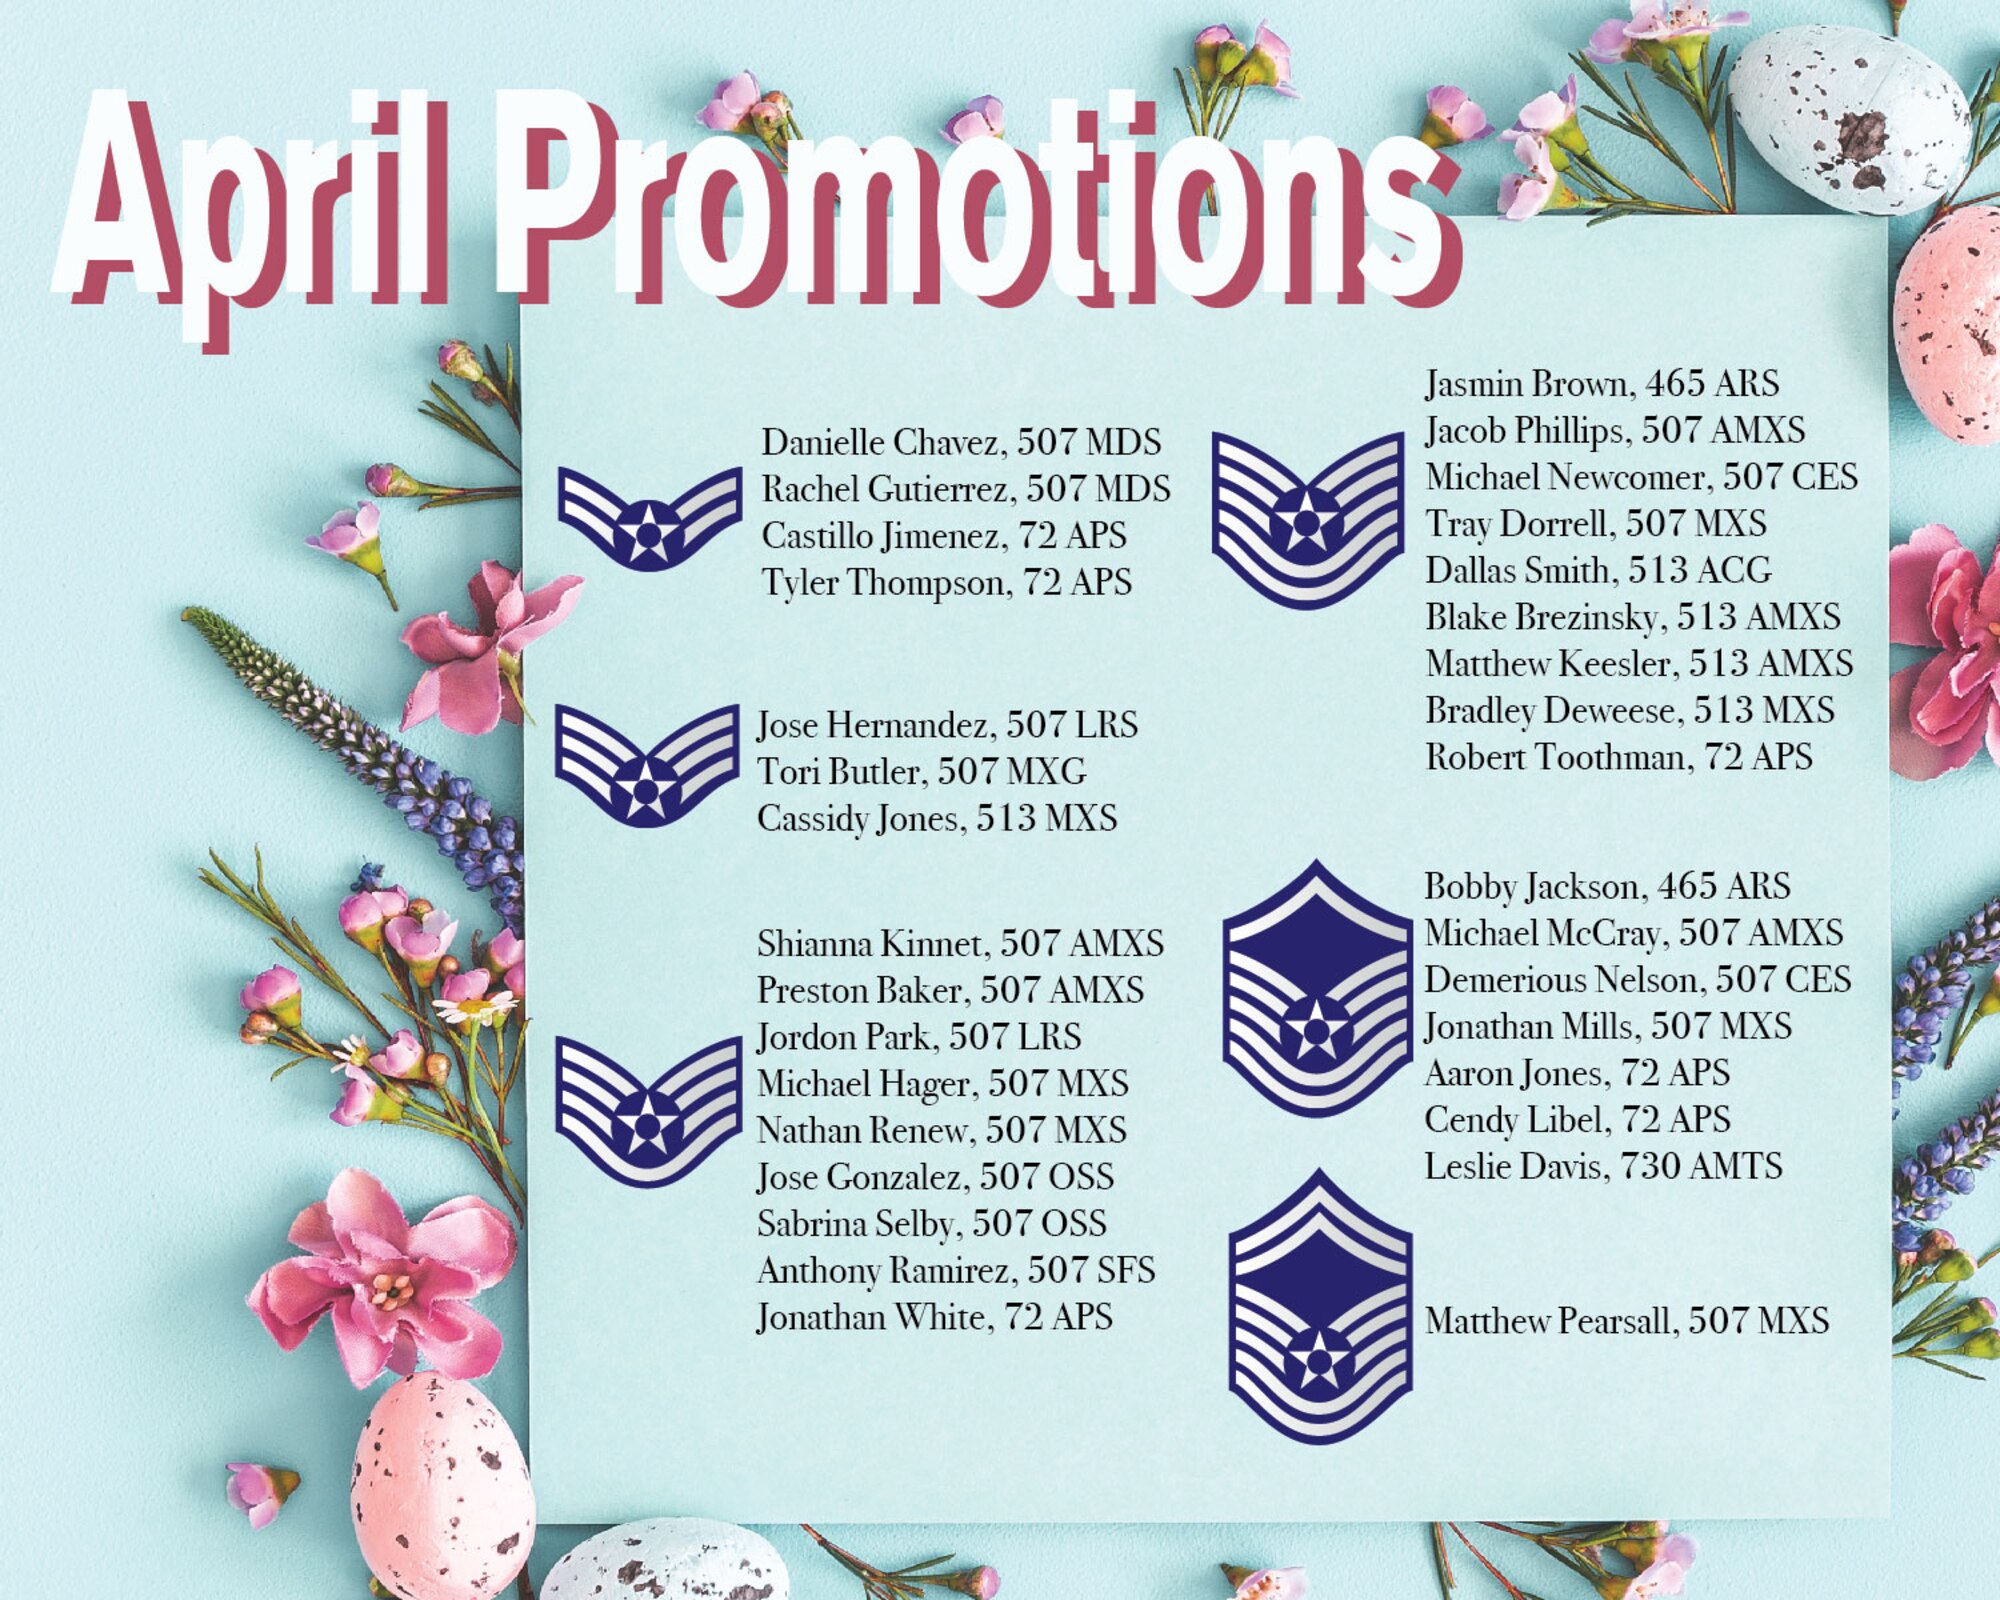 Promotions from the 507th Air Refueling Wing enlisted ranks April 3, 2020, at Tinker Air Force Base. (U.S. Air Force graphic by Senior Airman Mary Begy)